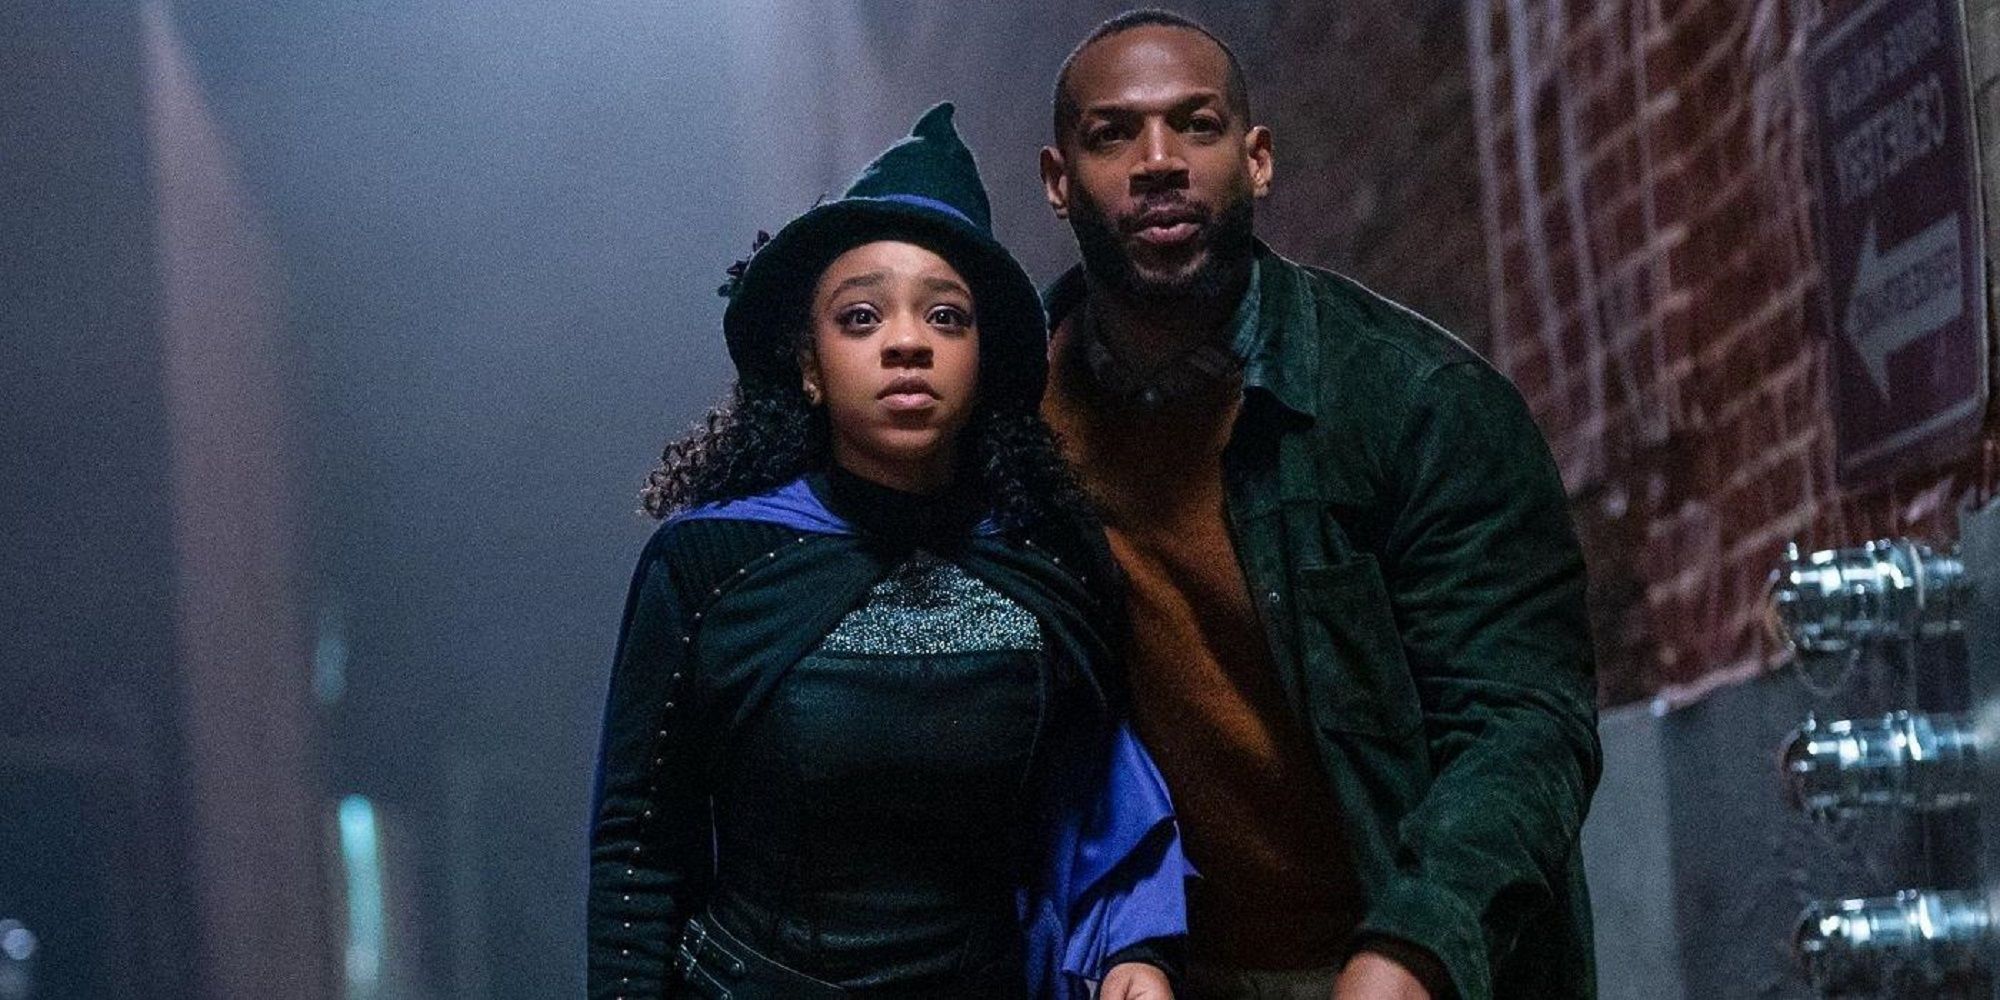 Marlon Wayans' character and his daughter looking spooked in an alley in 'The Curse of Bridge Hollow.'